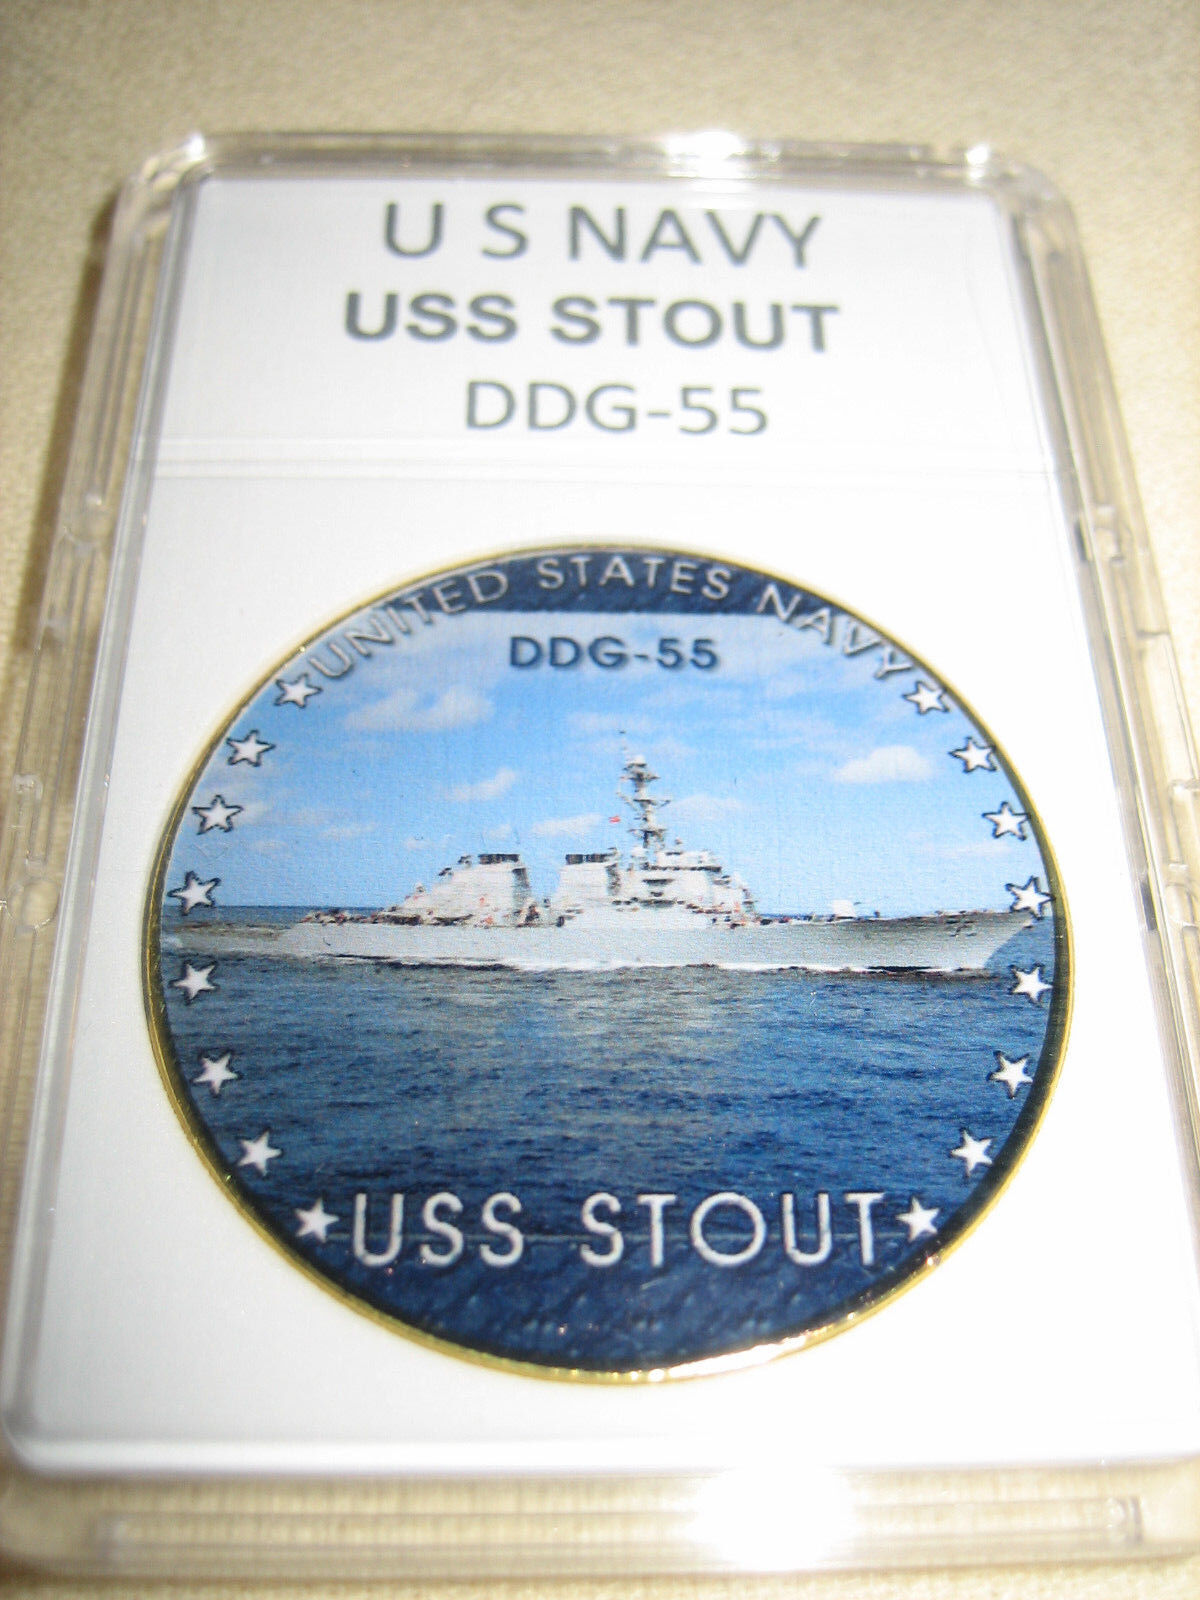 US NAVY - USS STOUT (DDG-55) Challenge Coin